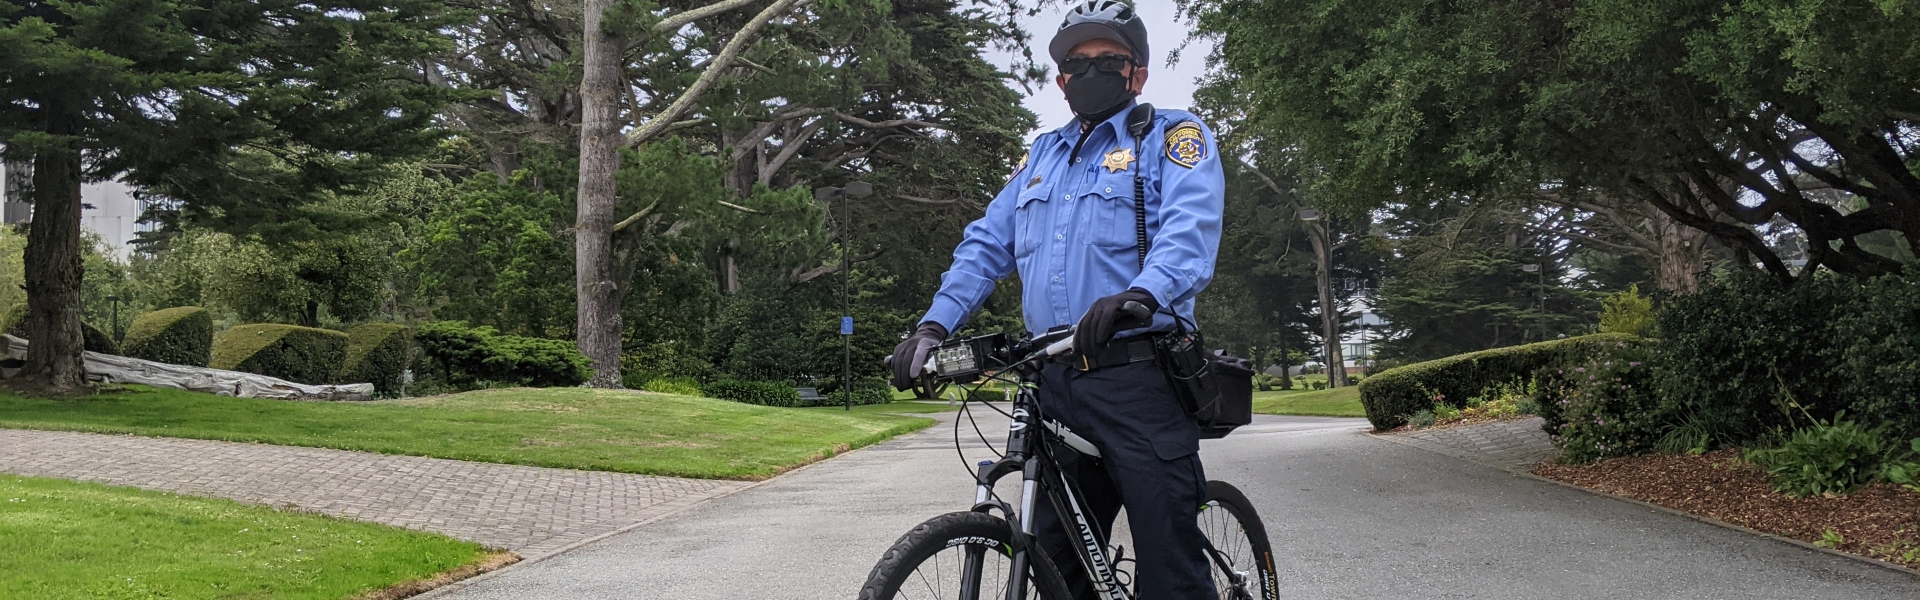 UPD Community Service Specialist on bicycle patrol on campus